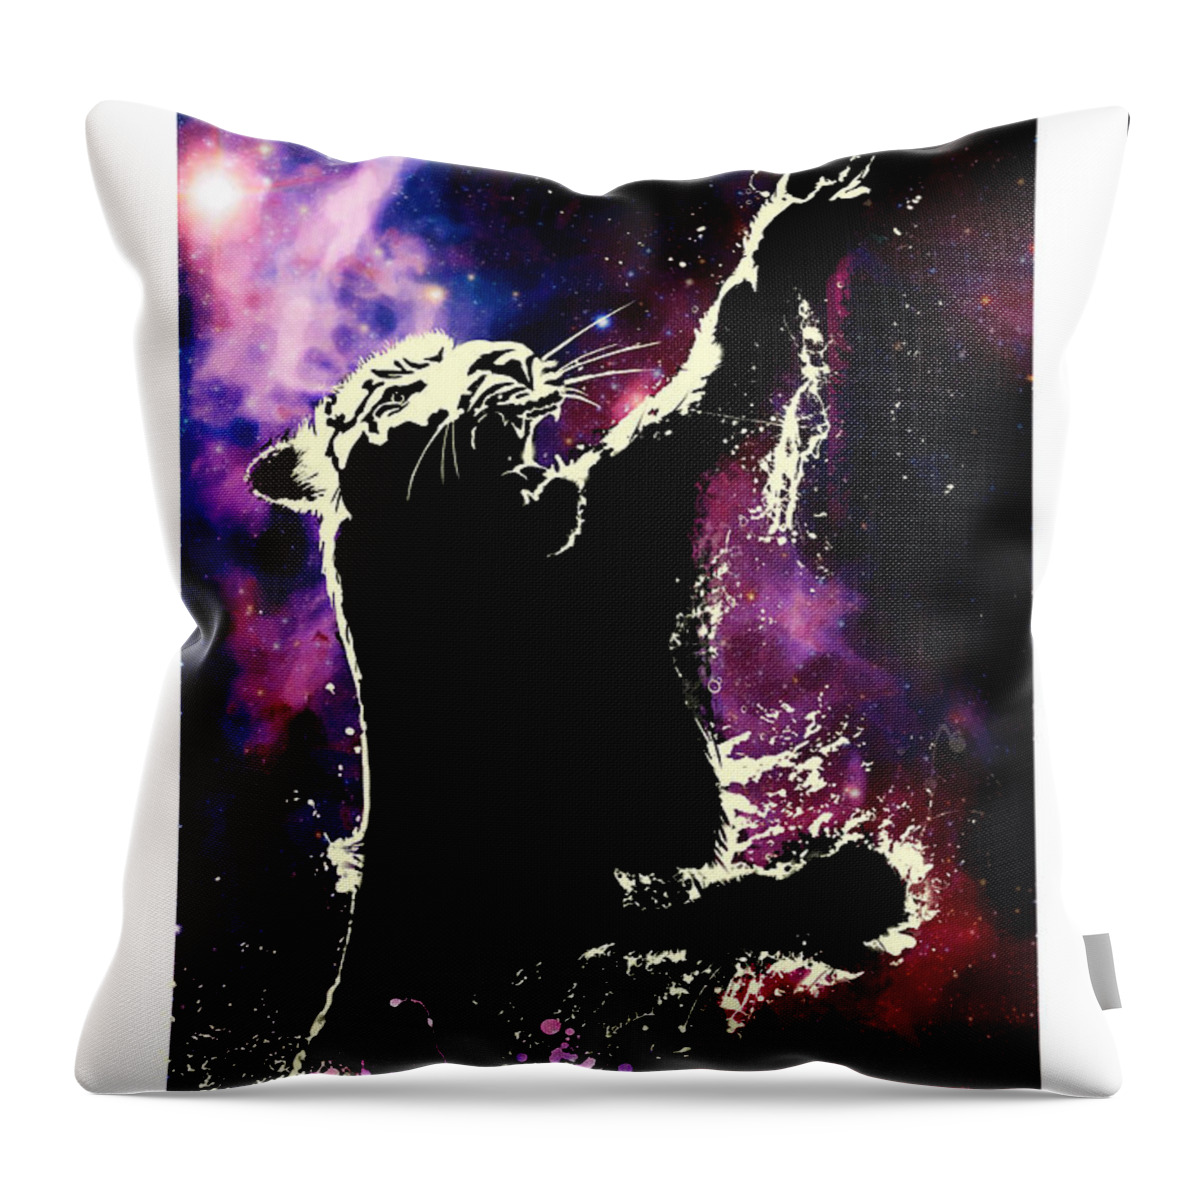 Space Throw Pillow featuring the painting Galactic Tiger by Sassan Filsoof